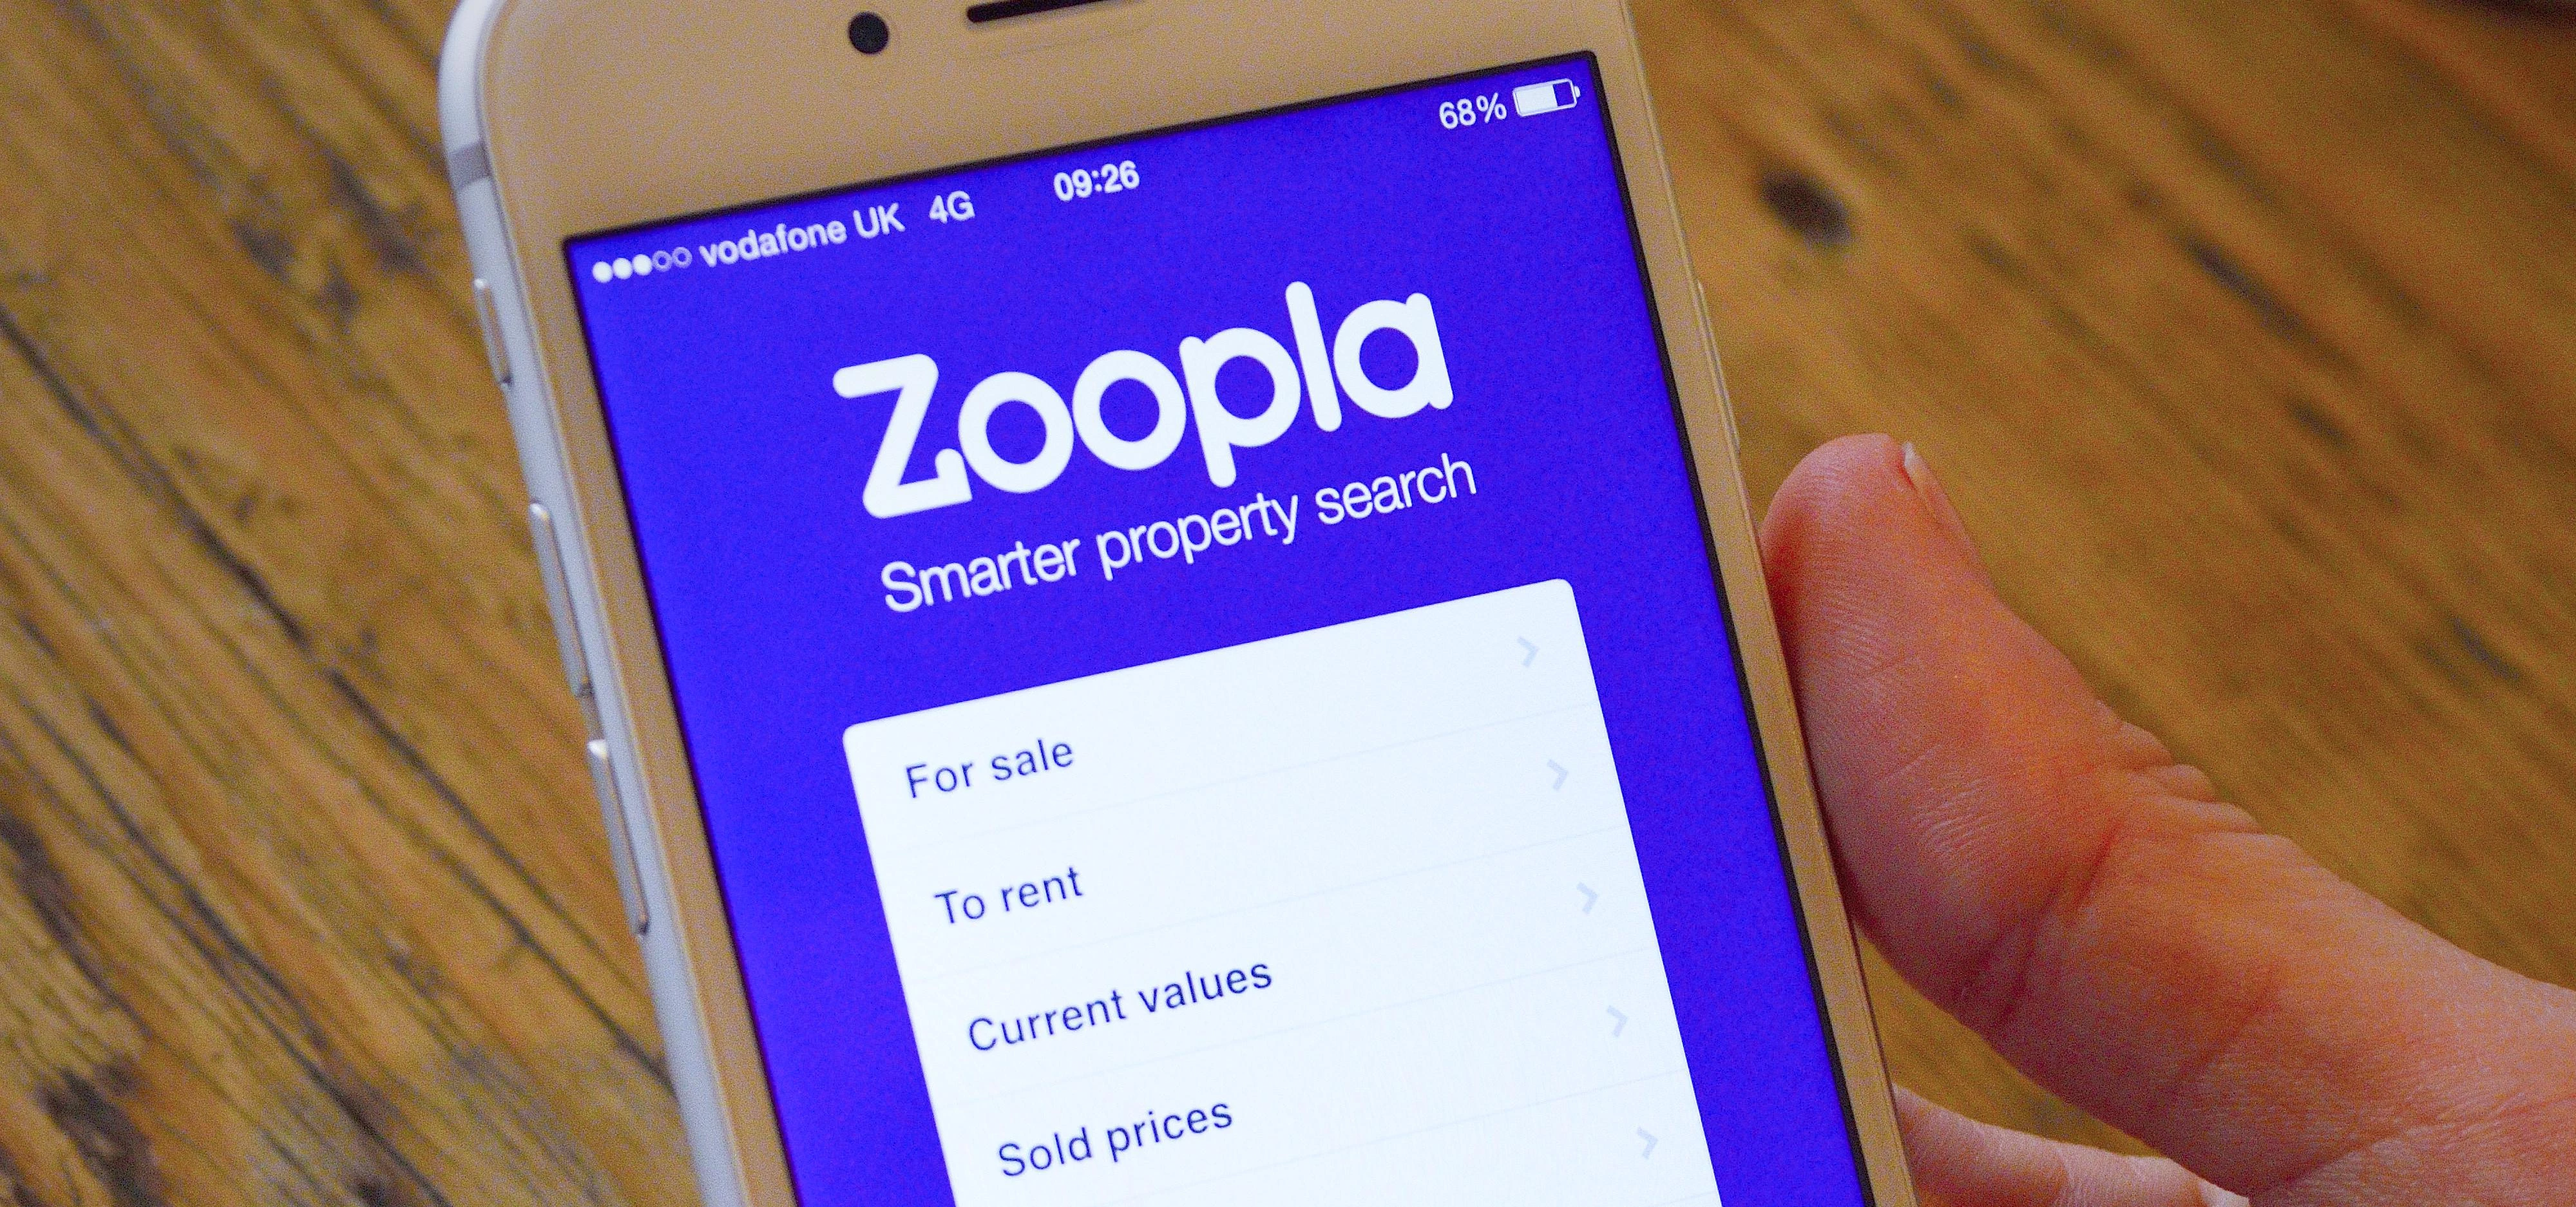 Zoopla App on a white iPhone 6